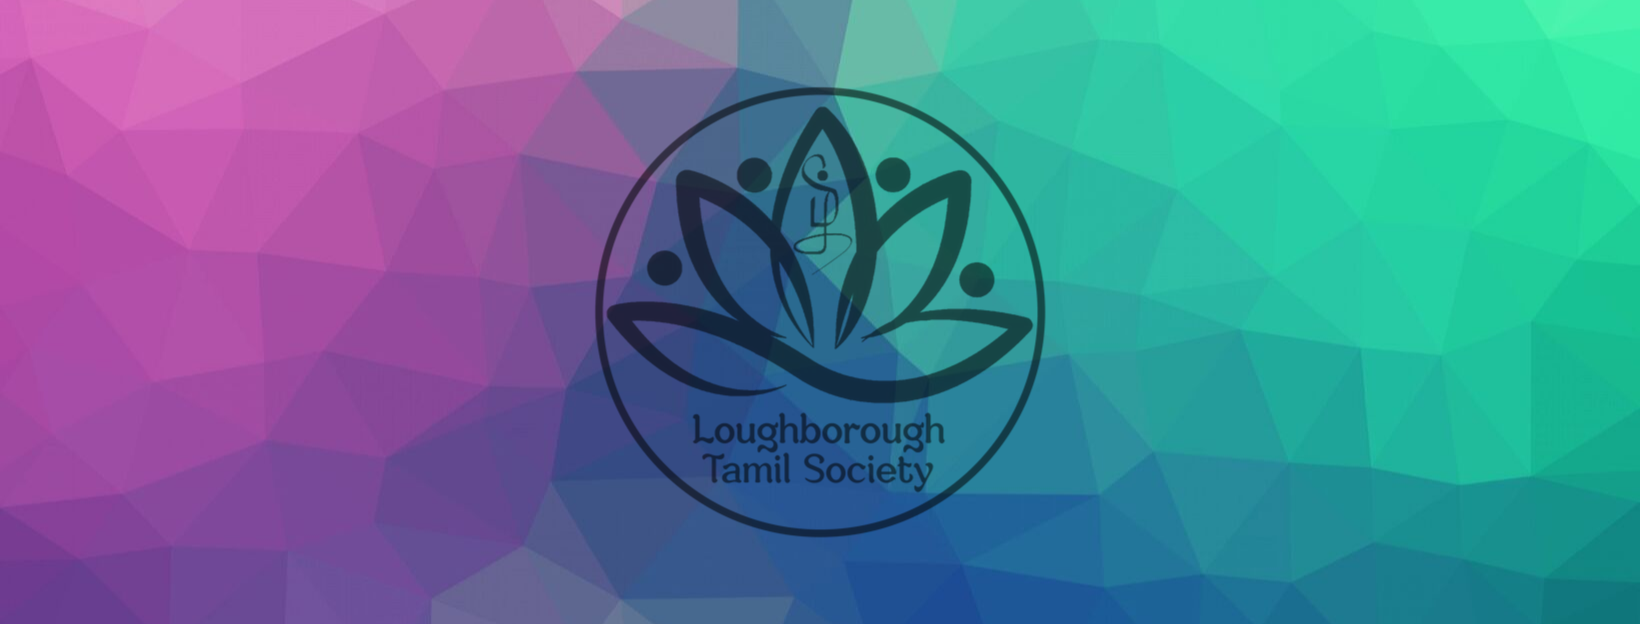 Banner for Loughborough Tamil Society